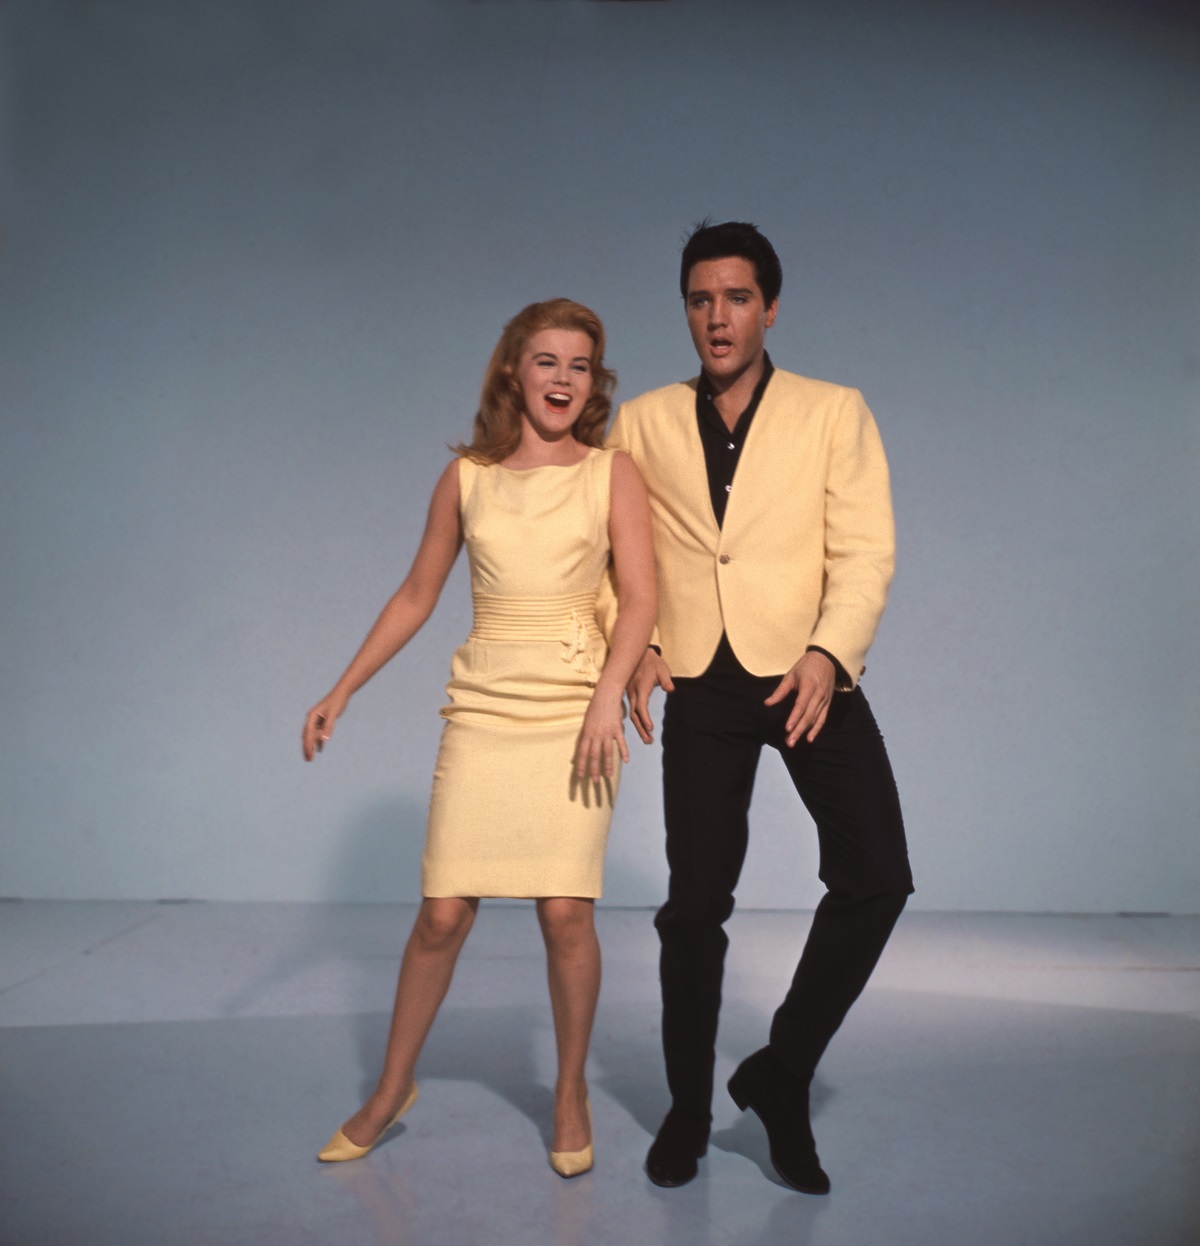 Ann-Margret and Elvis Presley smiling and dancing in a color promotional still from 'Viva Las Vegas' 